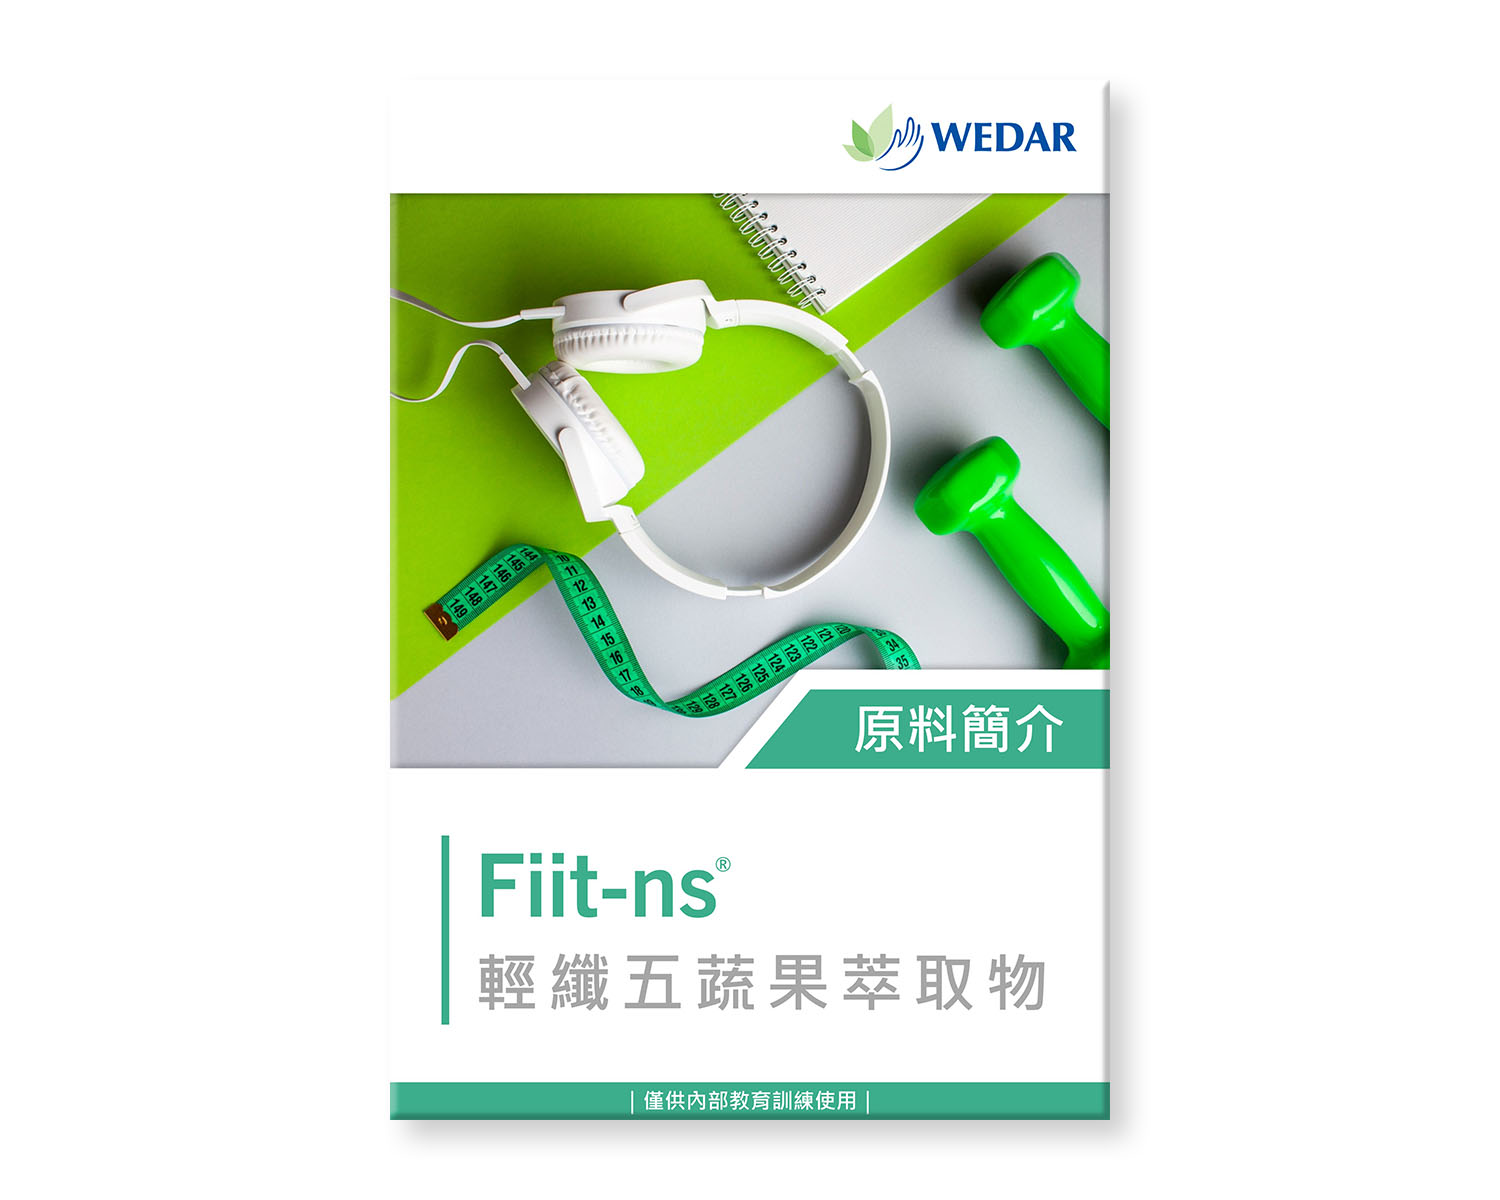 You are currently viewing Fiit-ns® 輕纖五蔬果萃取物